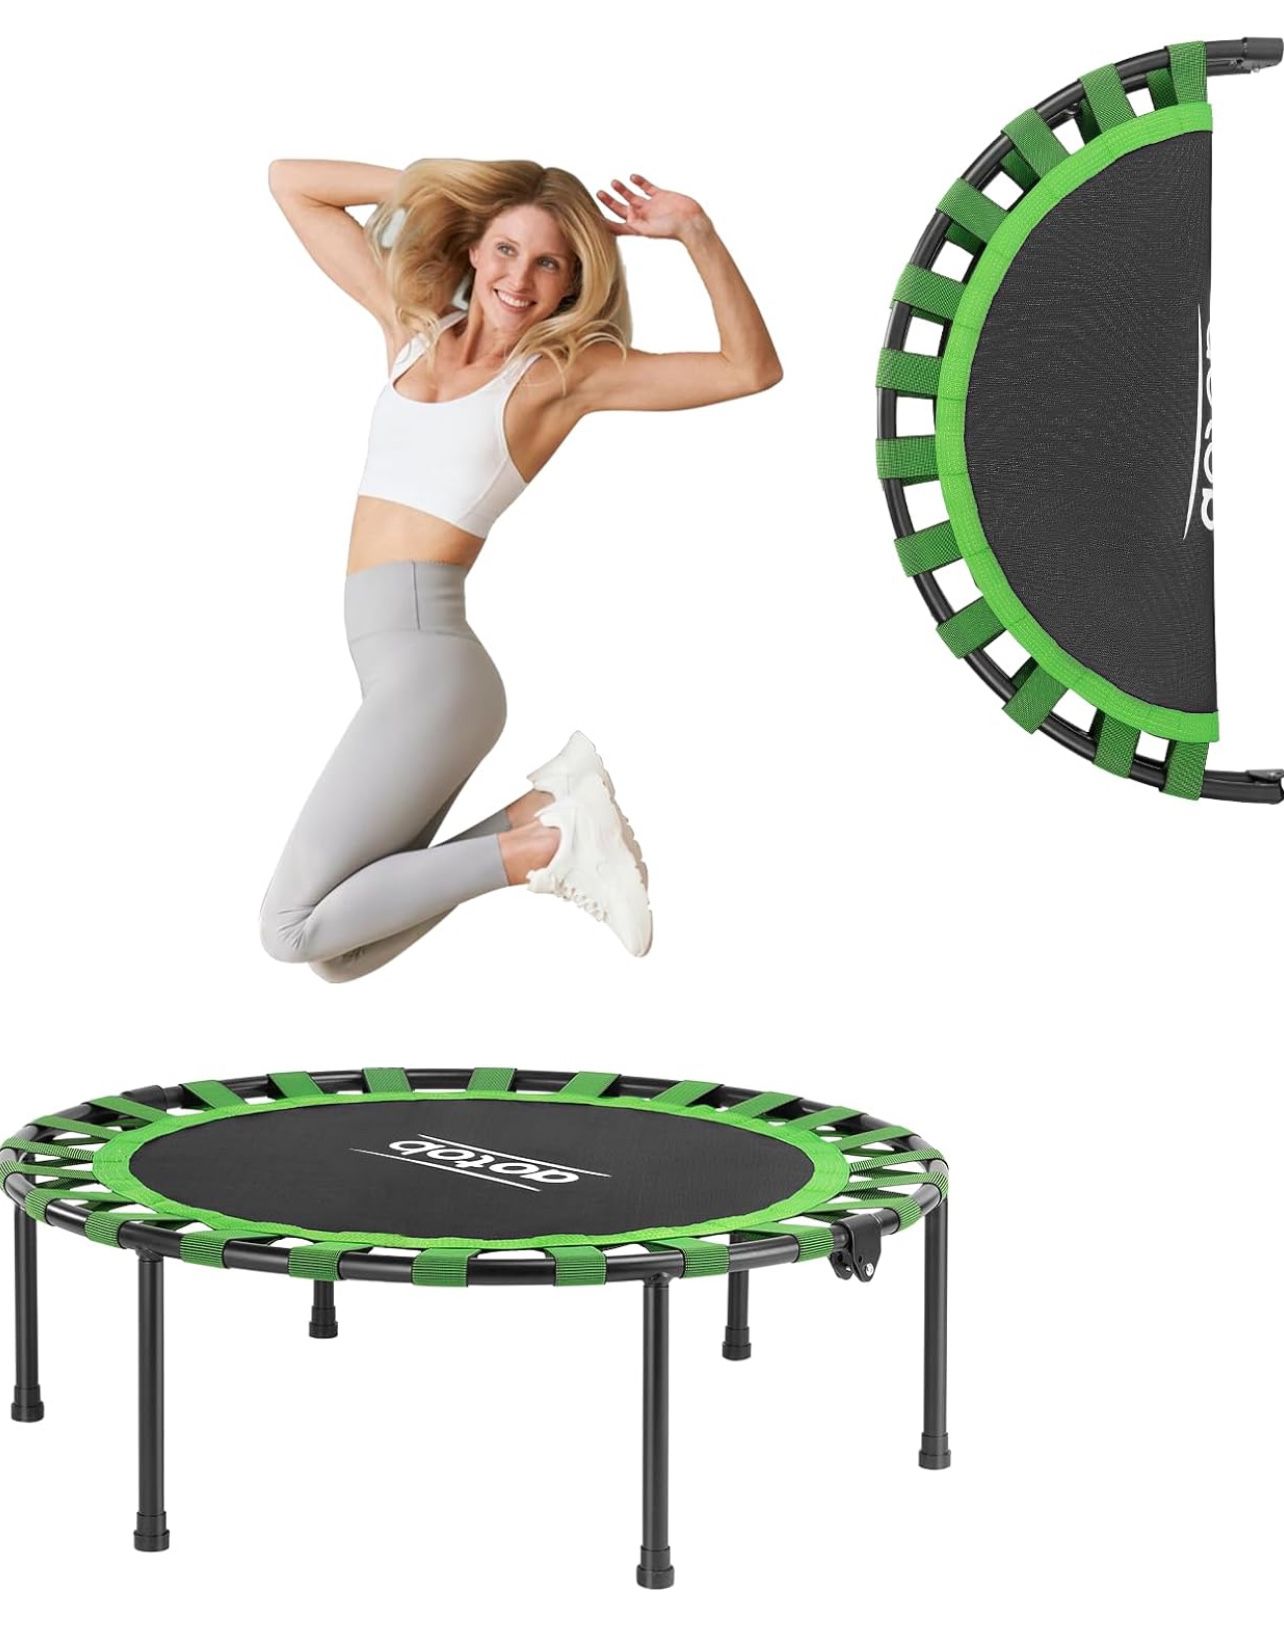 Brandnew  38”Fitness Trampoline for Adult, Max Load 400/450 LBS Foldable Mini Trampoline with Durable Bungees, Small Rebounder Exercise Trampoline for